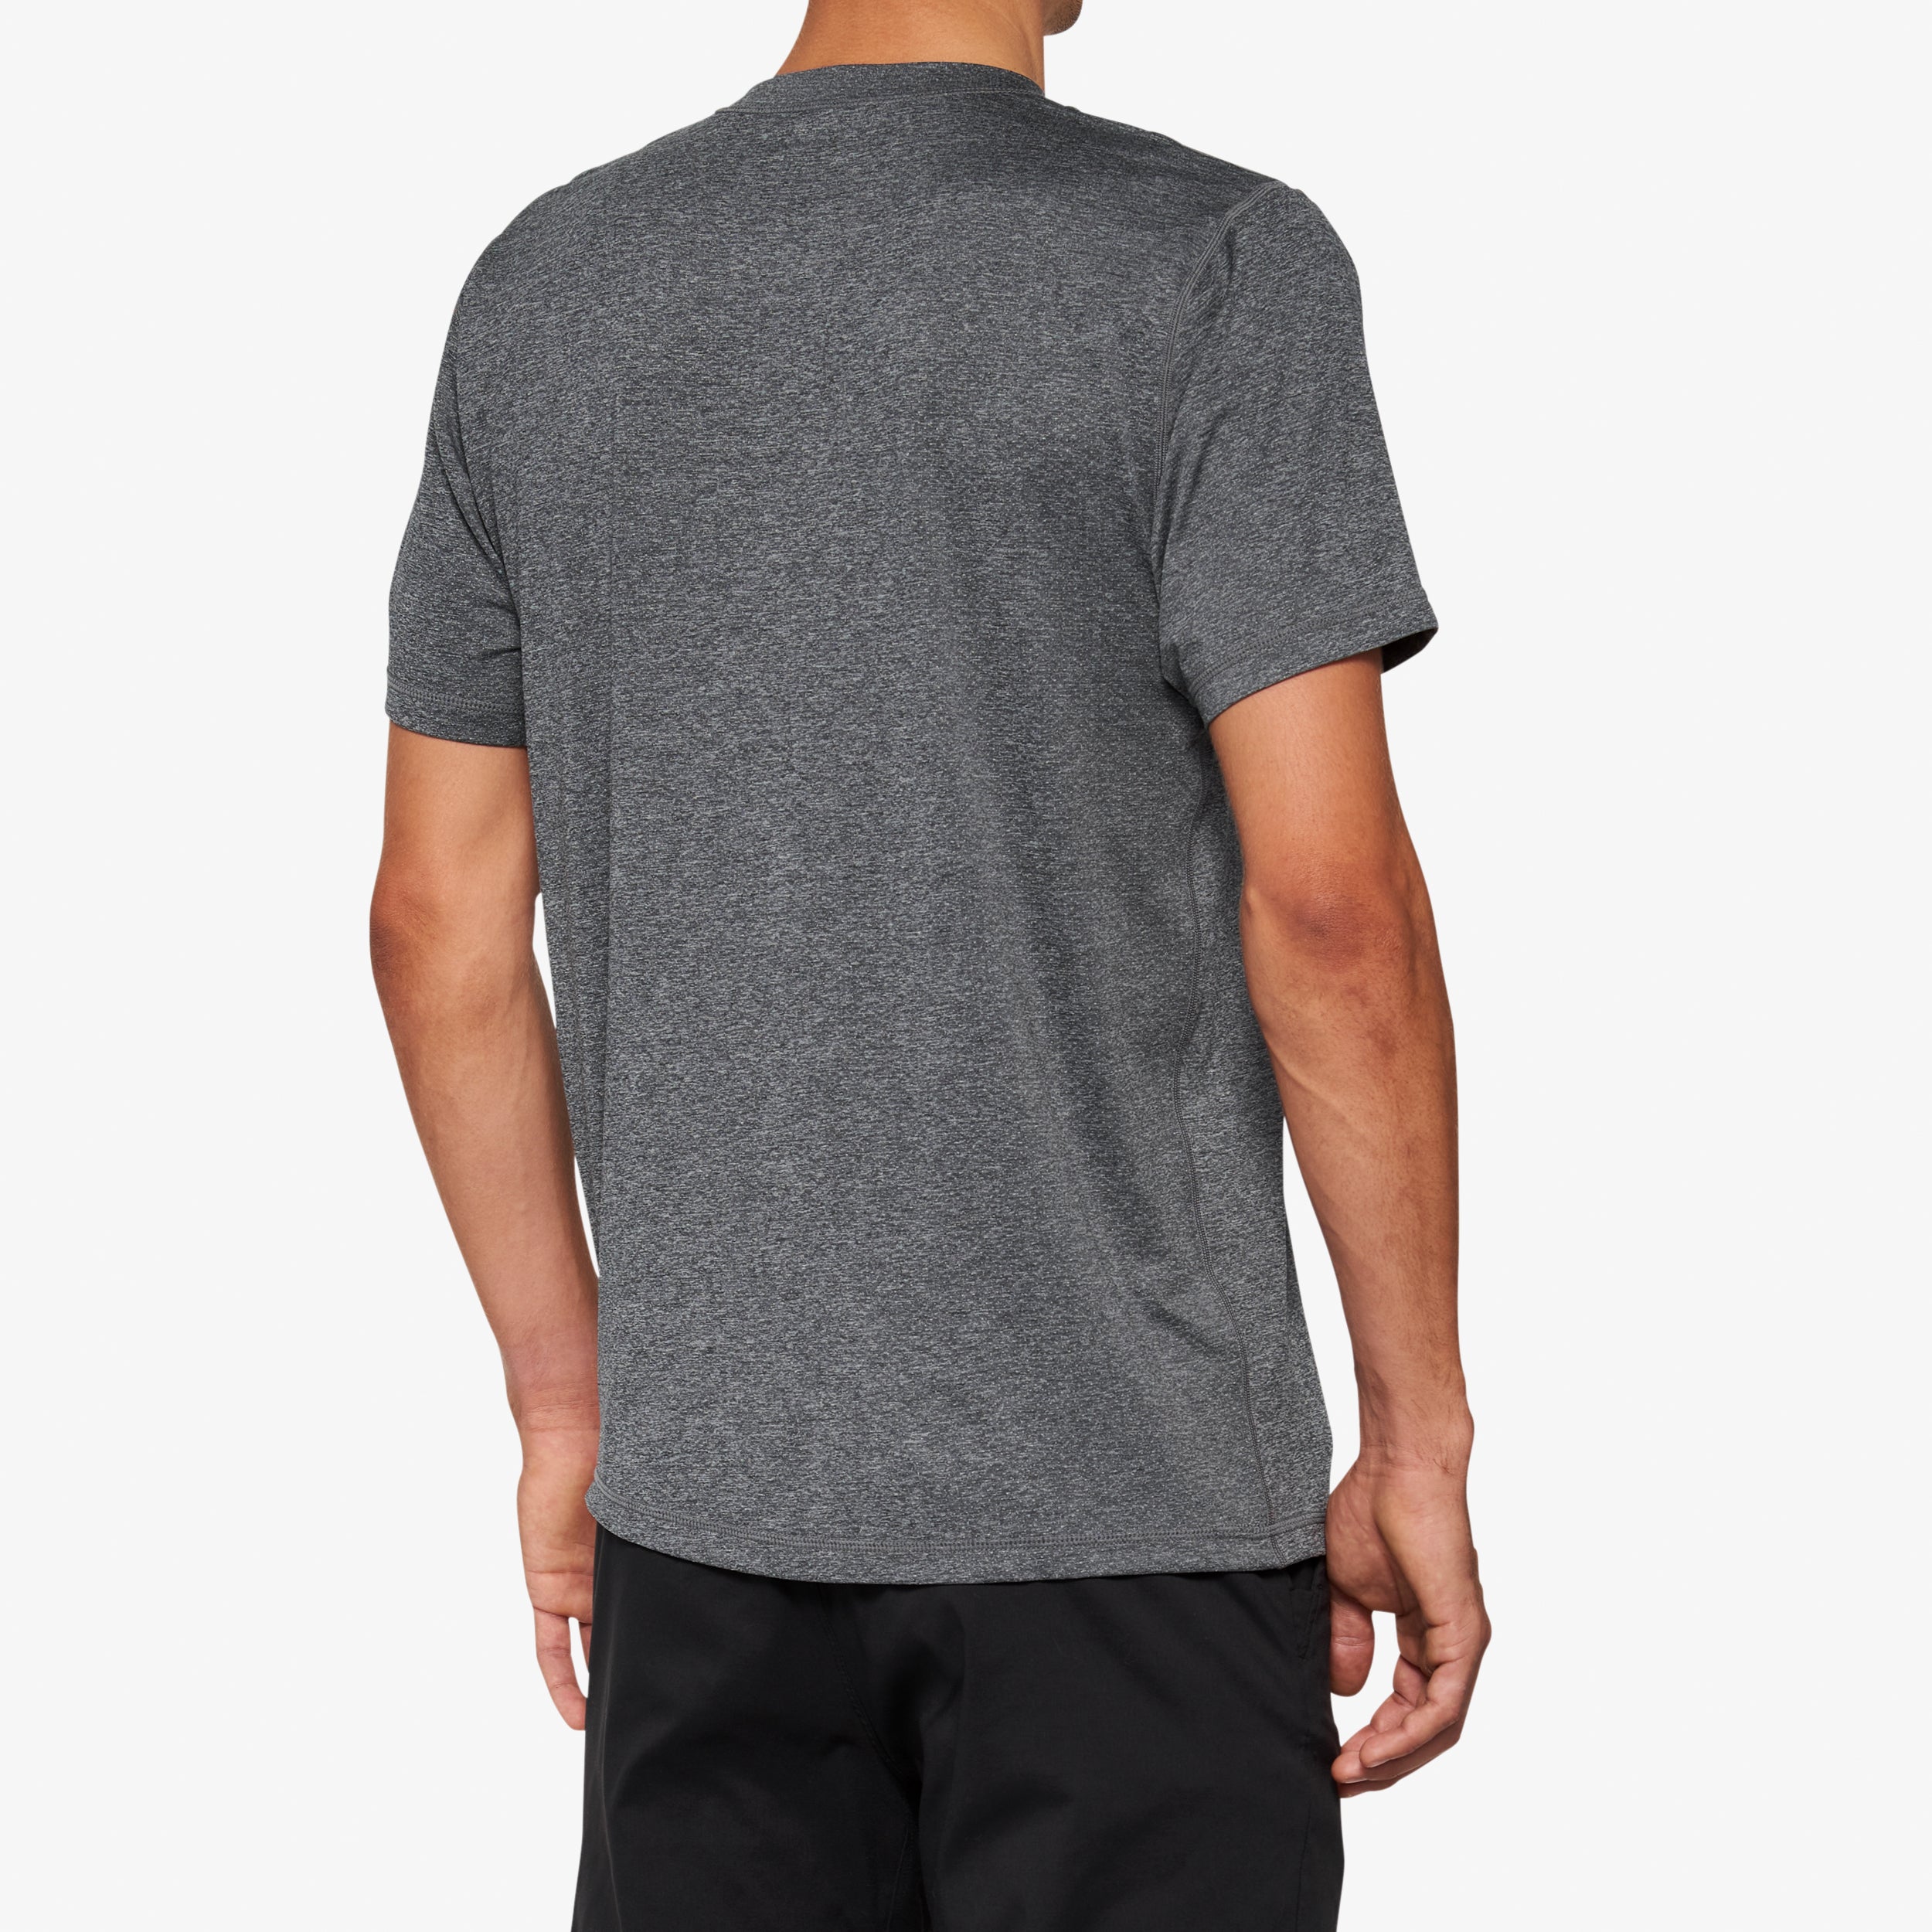 MISSION Athletic Short Sleeve Tee Heather Charcoal